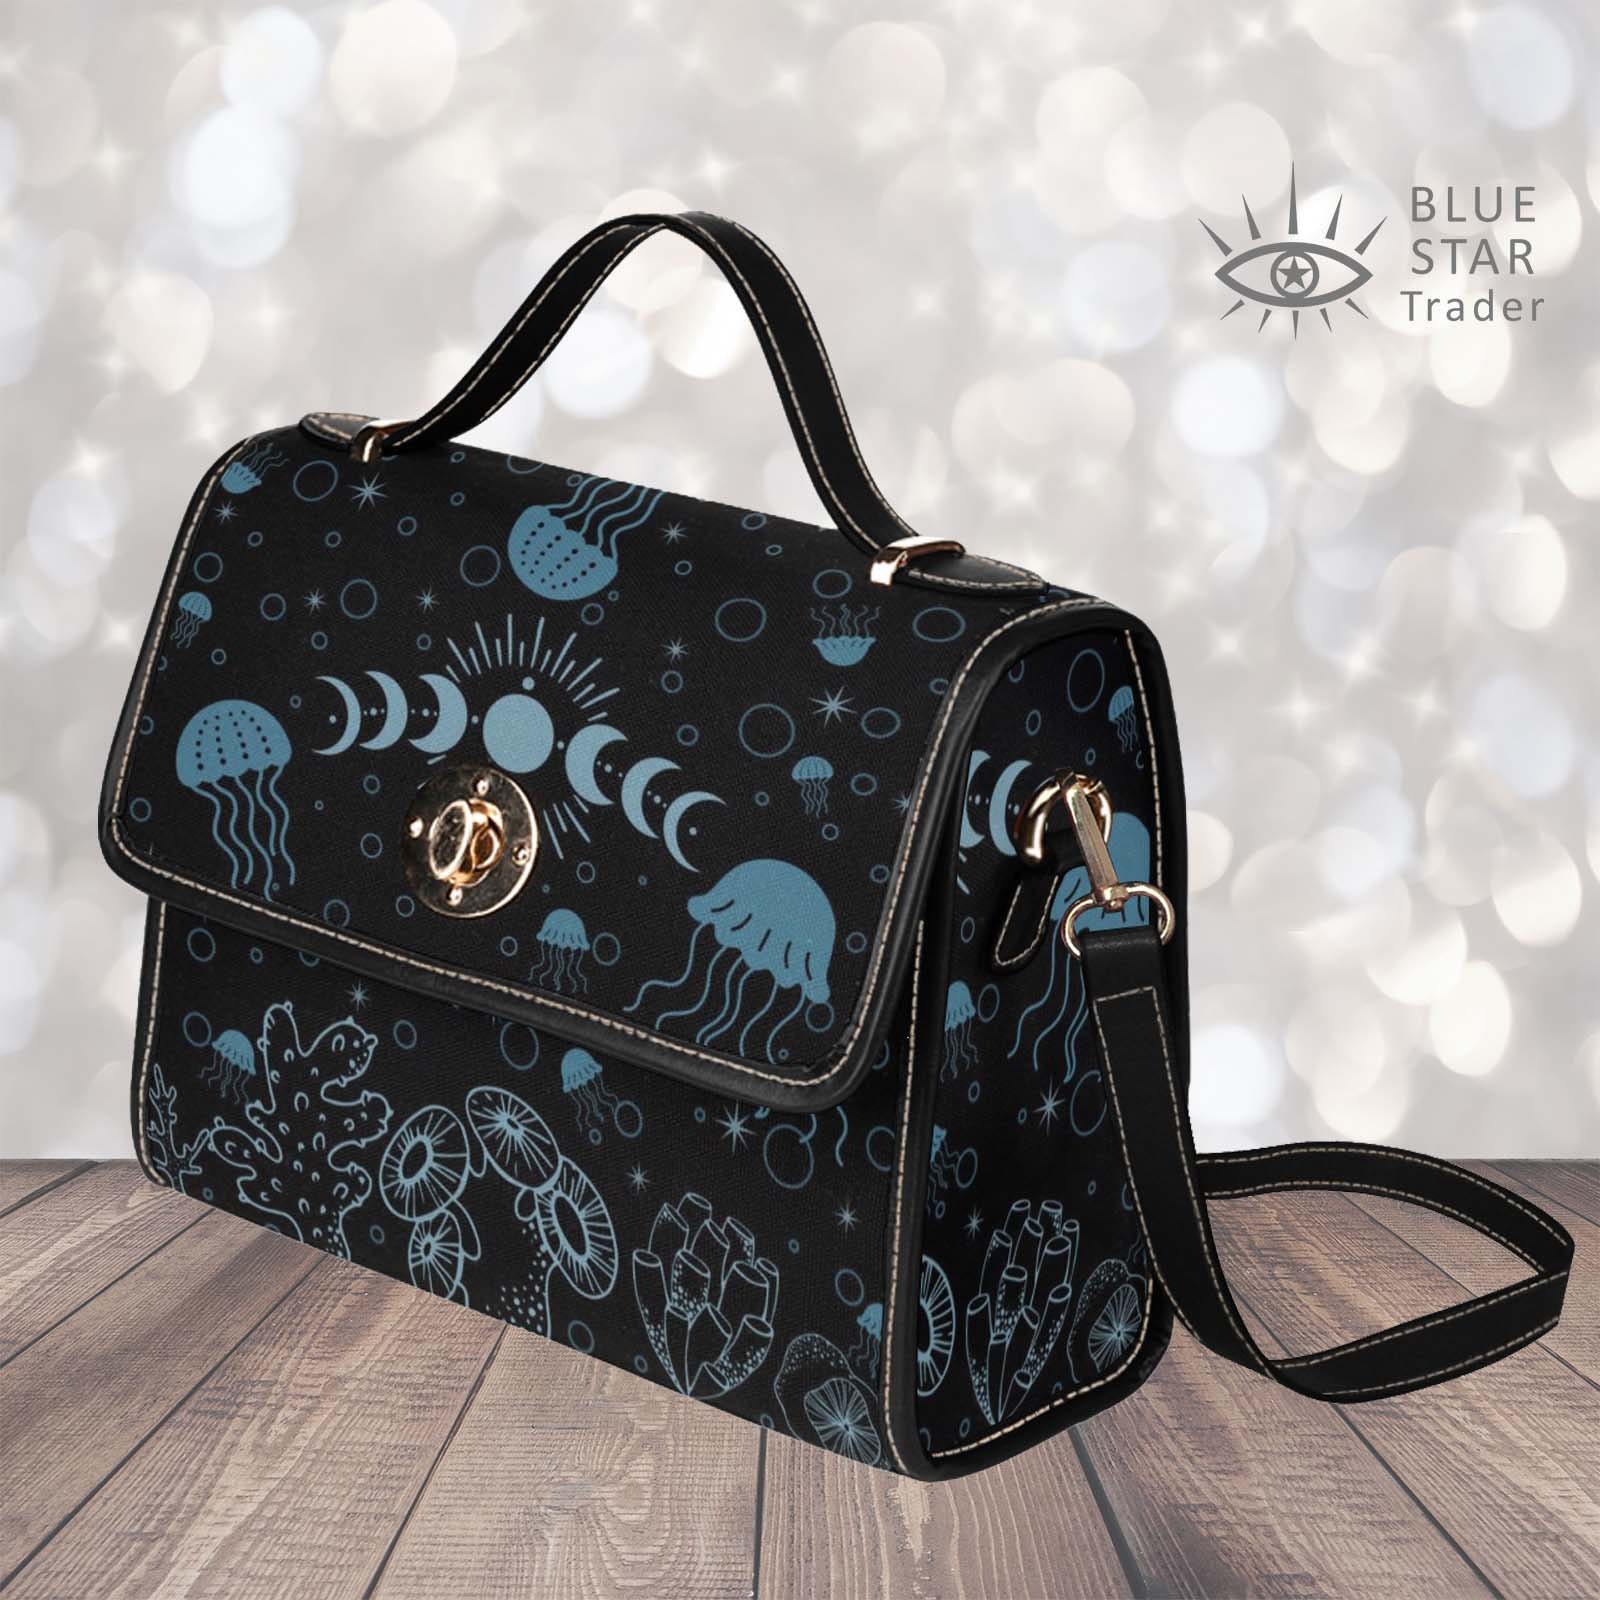 Trendy Messenger Bags with Interchangeable Straps : Lululoves7